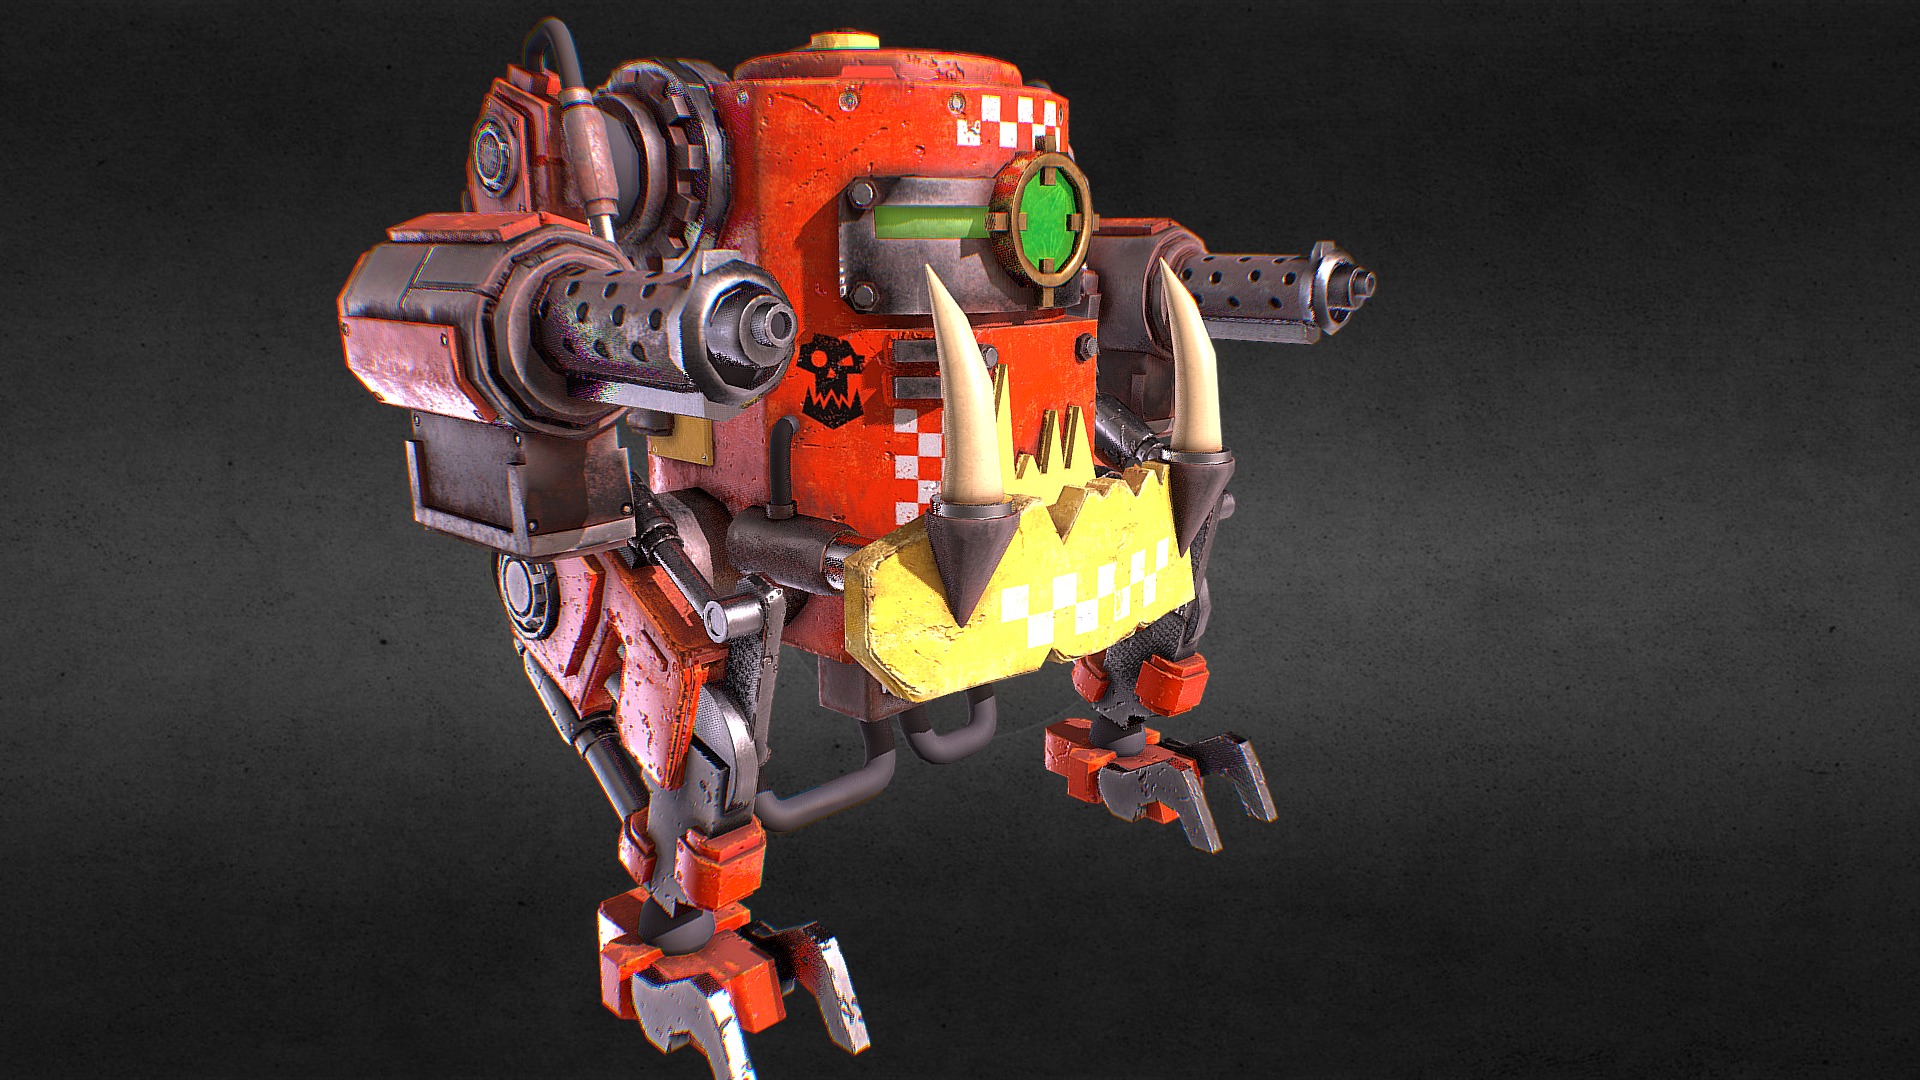 3D model Killa Kan - This is a 3D model of the Killa Kan. The 3D model is about a red and yellow robot.